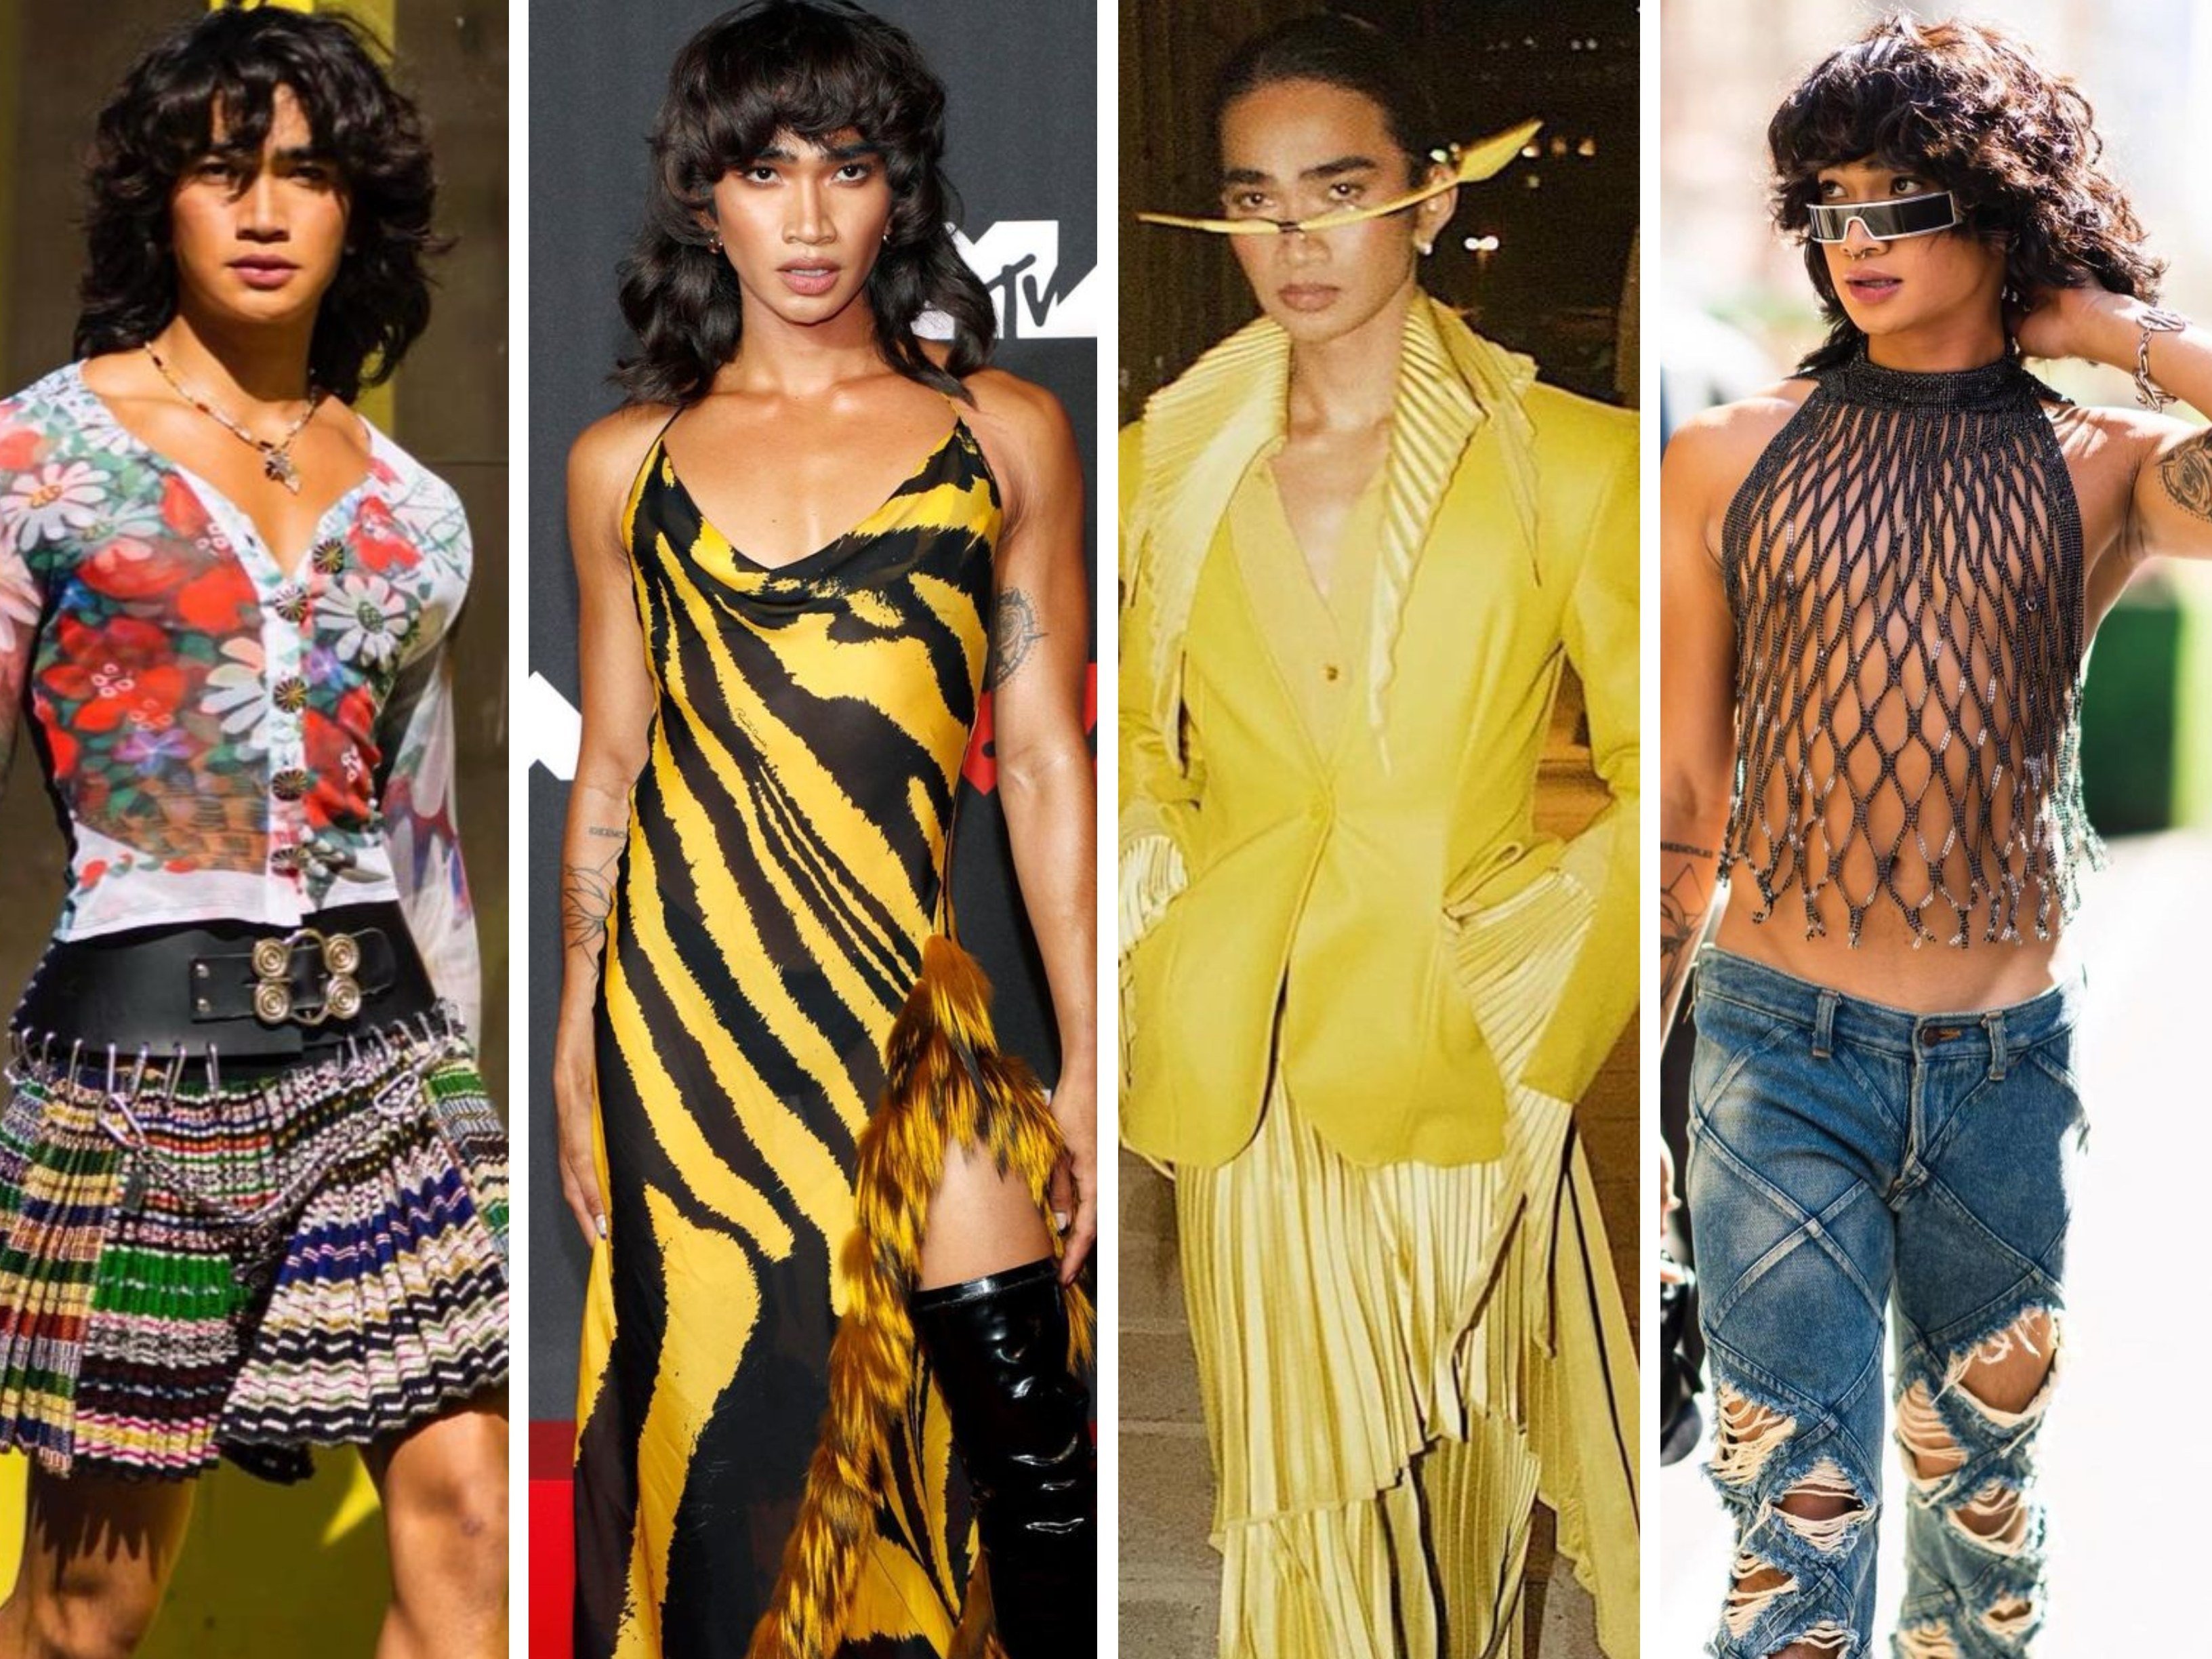 From chic and colourful ensembles to daring fishnet tops, Fil-Am influencer Bretman Rock sure knows how to turn heads with his genderfluid looks. Photos: @bretmanrock, @robertwun/Instagram